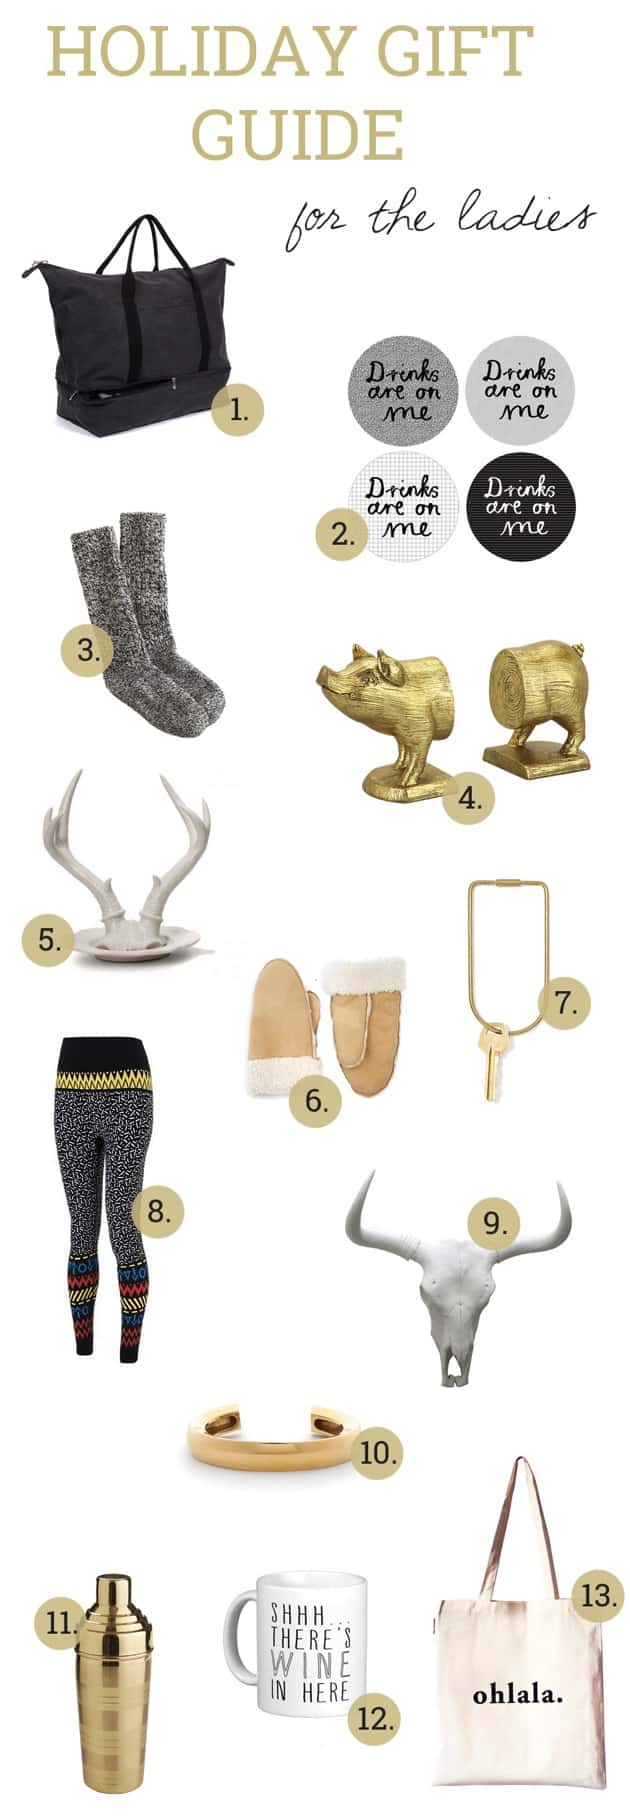 Holiday gift guide for ladies